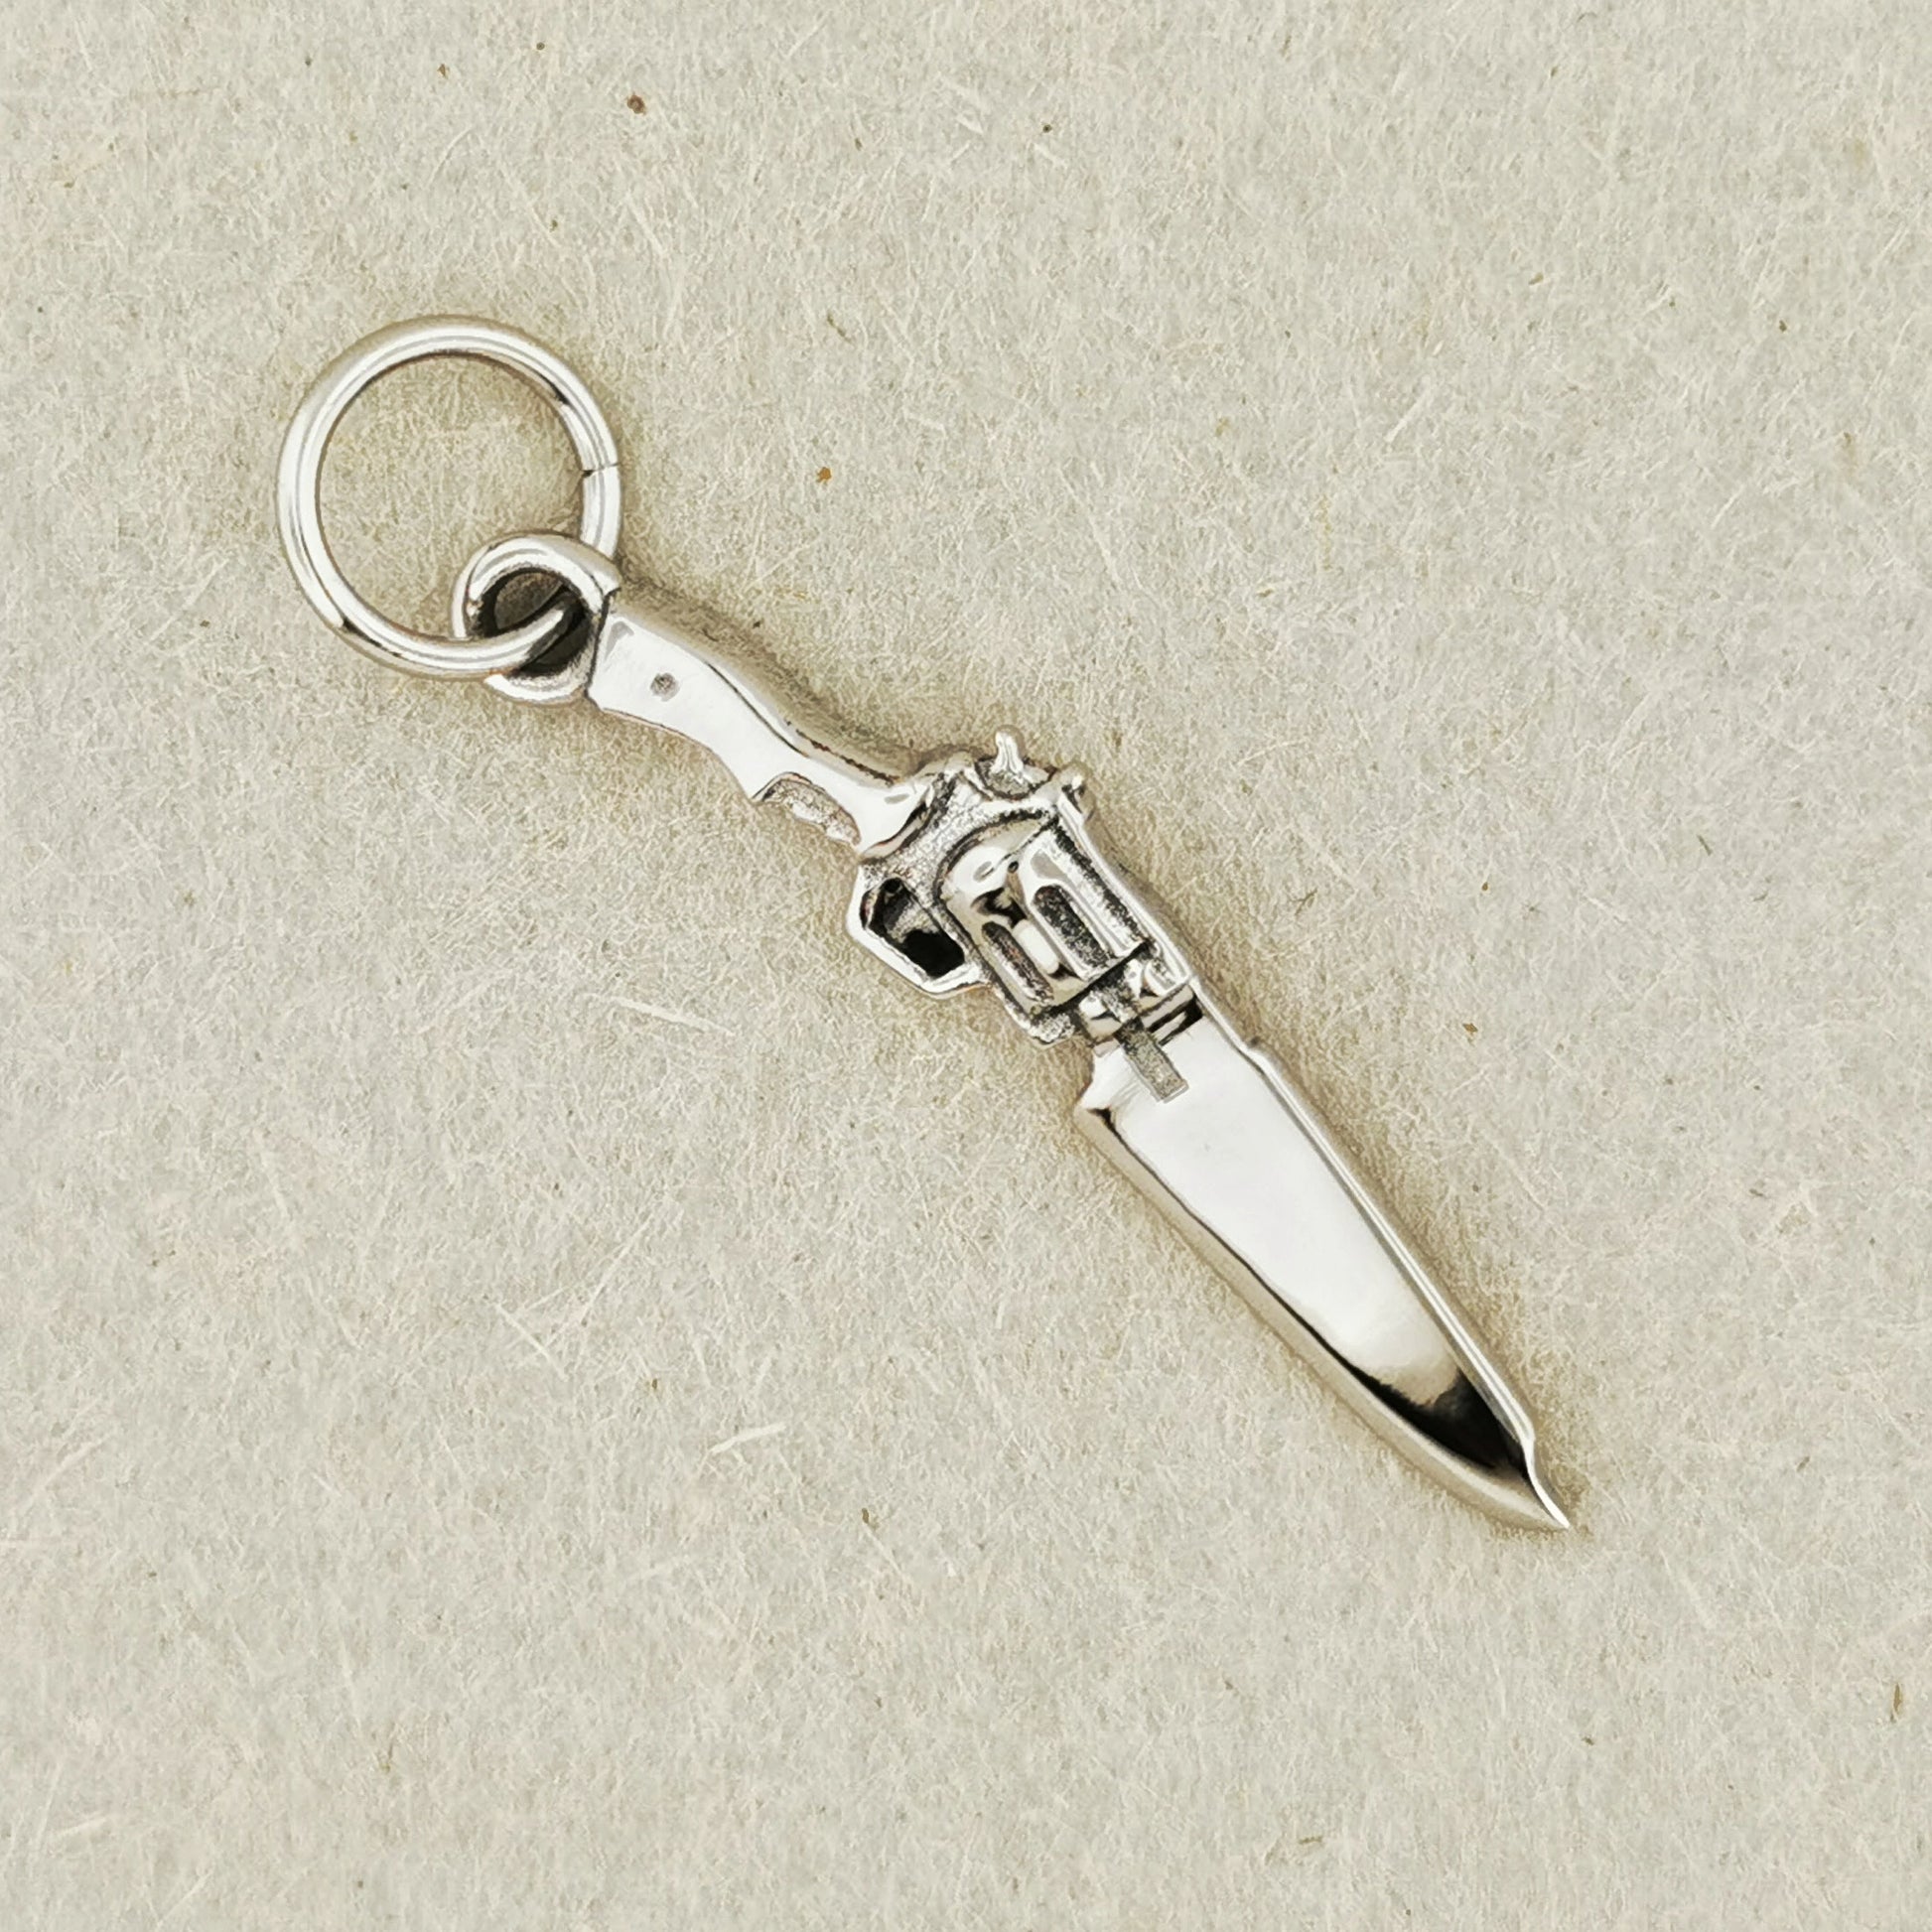 Final Fantasy 8 Gunblade Charm in Stainless Steel, FF8 Squall Pendant, Final Fantasy VIII Pendant, Final Fantasy Jewelry, Final Fantasy pendant, FF8 stainless steel charm, FF8 Gunblade pendant, Stainless Steel Gunblade Pendant, Gamer Girl Jewelry